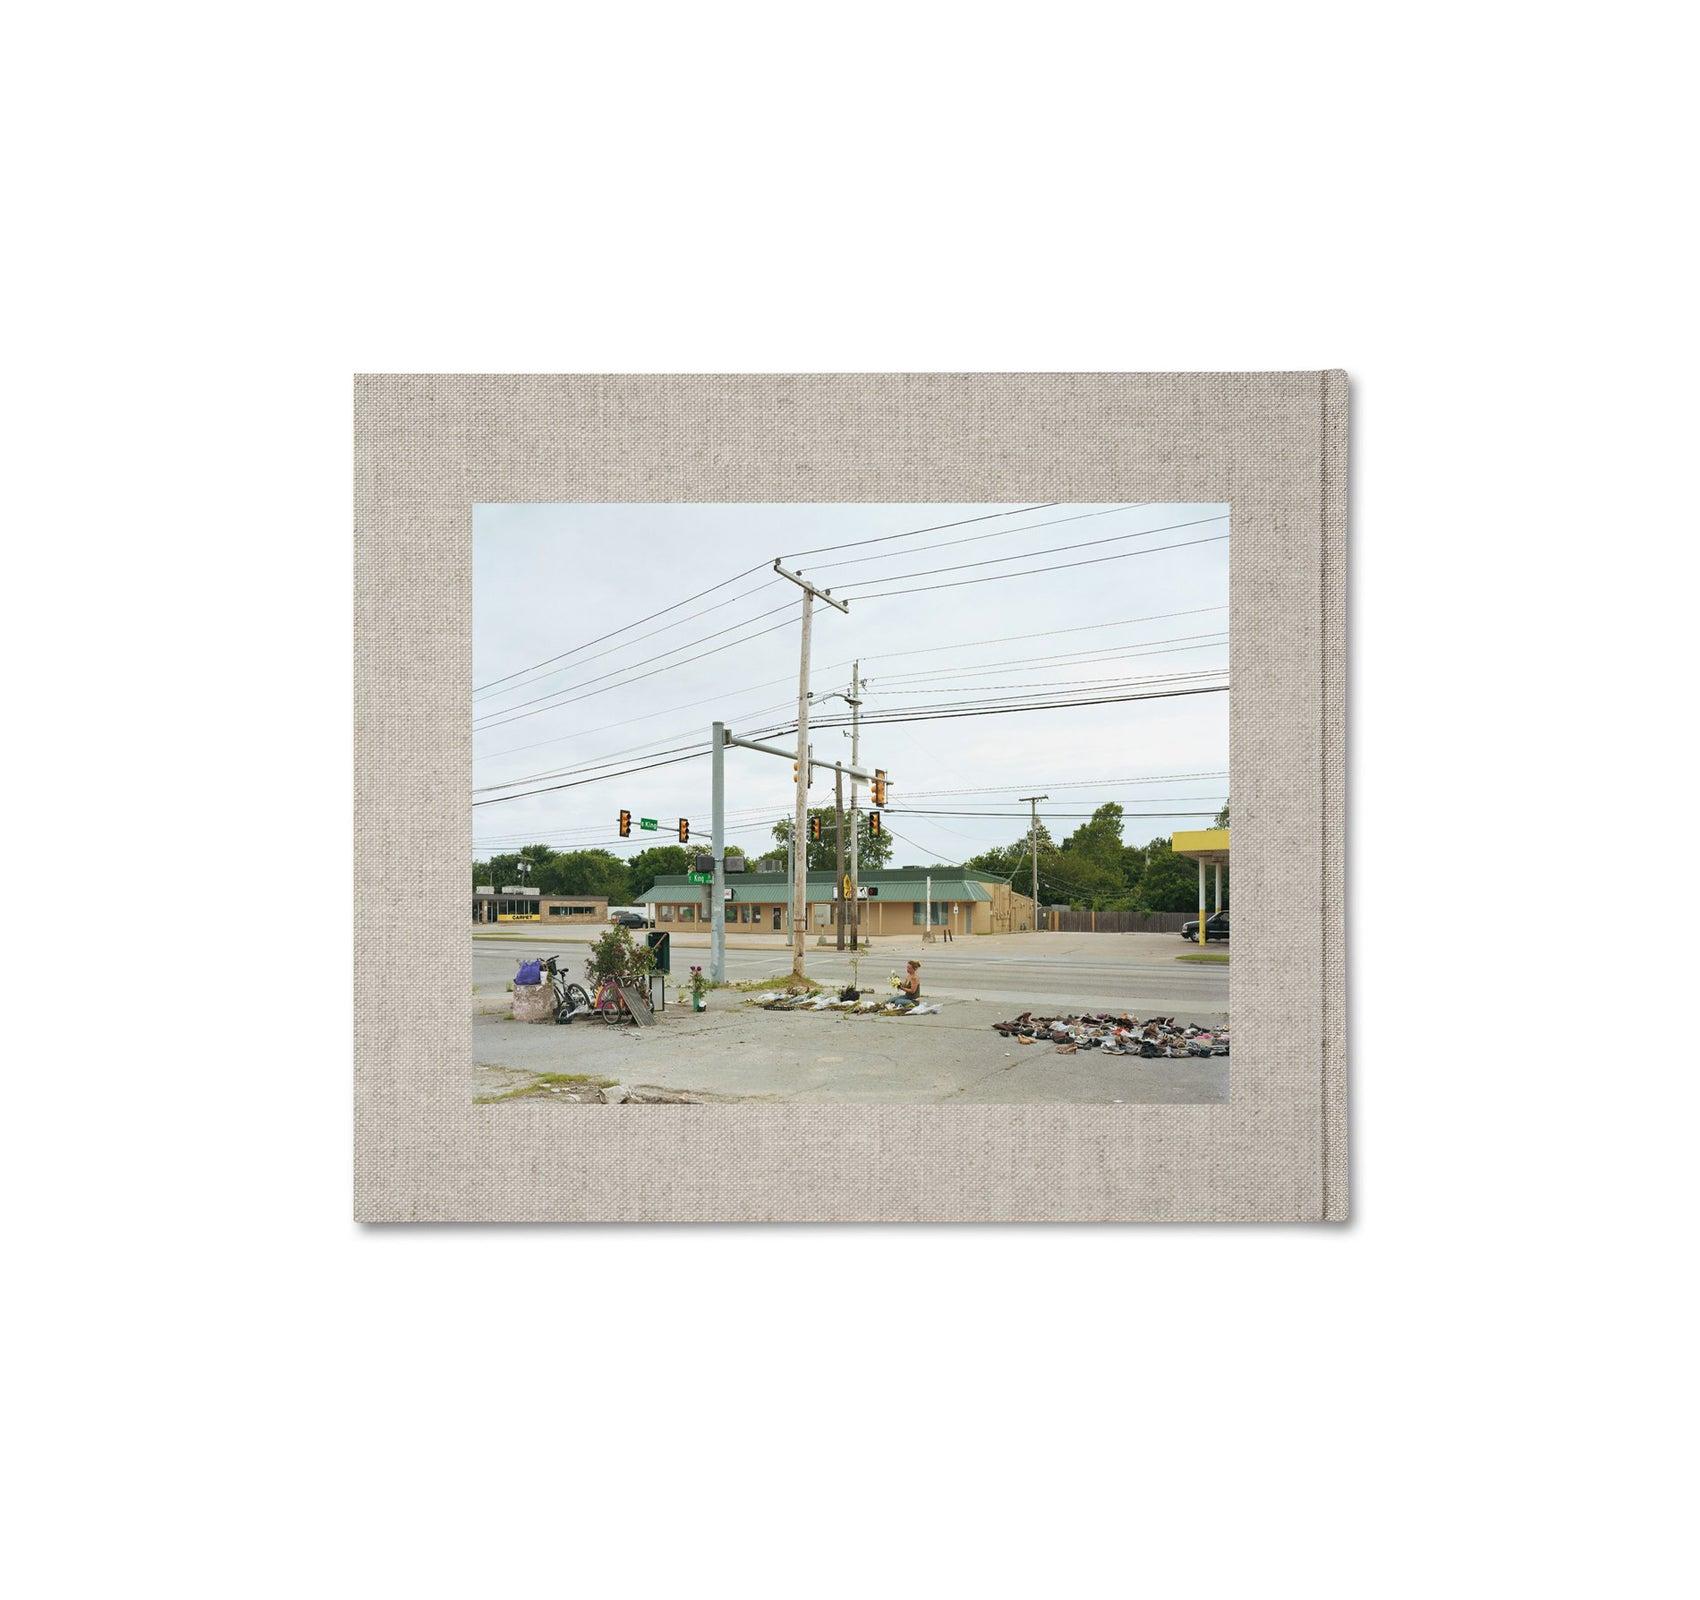 A POUND OF PICTURES by Alec Soth [SIGNED]　アレック・ソス　作品集